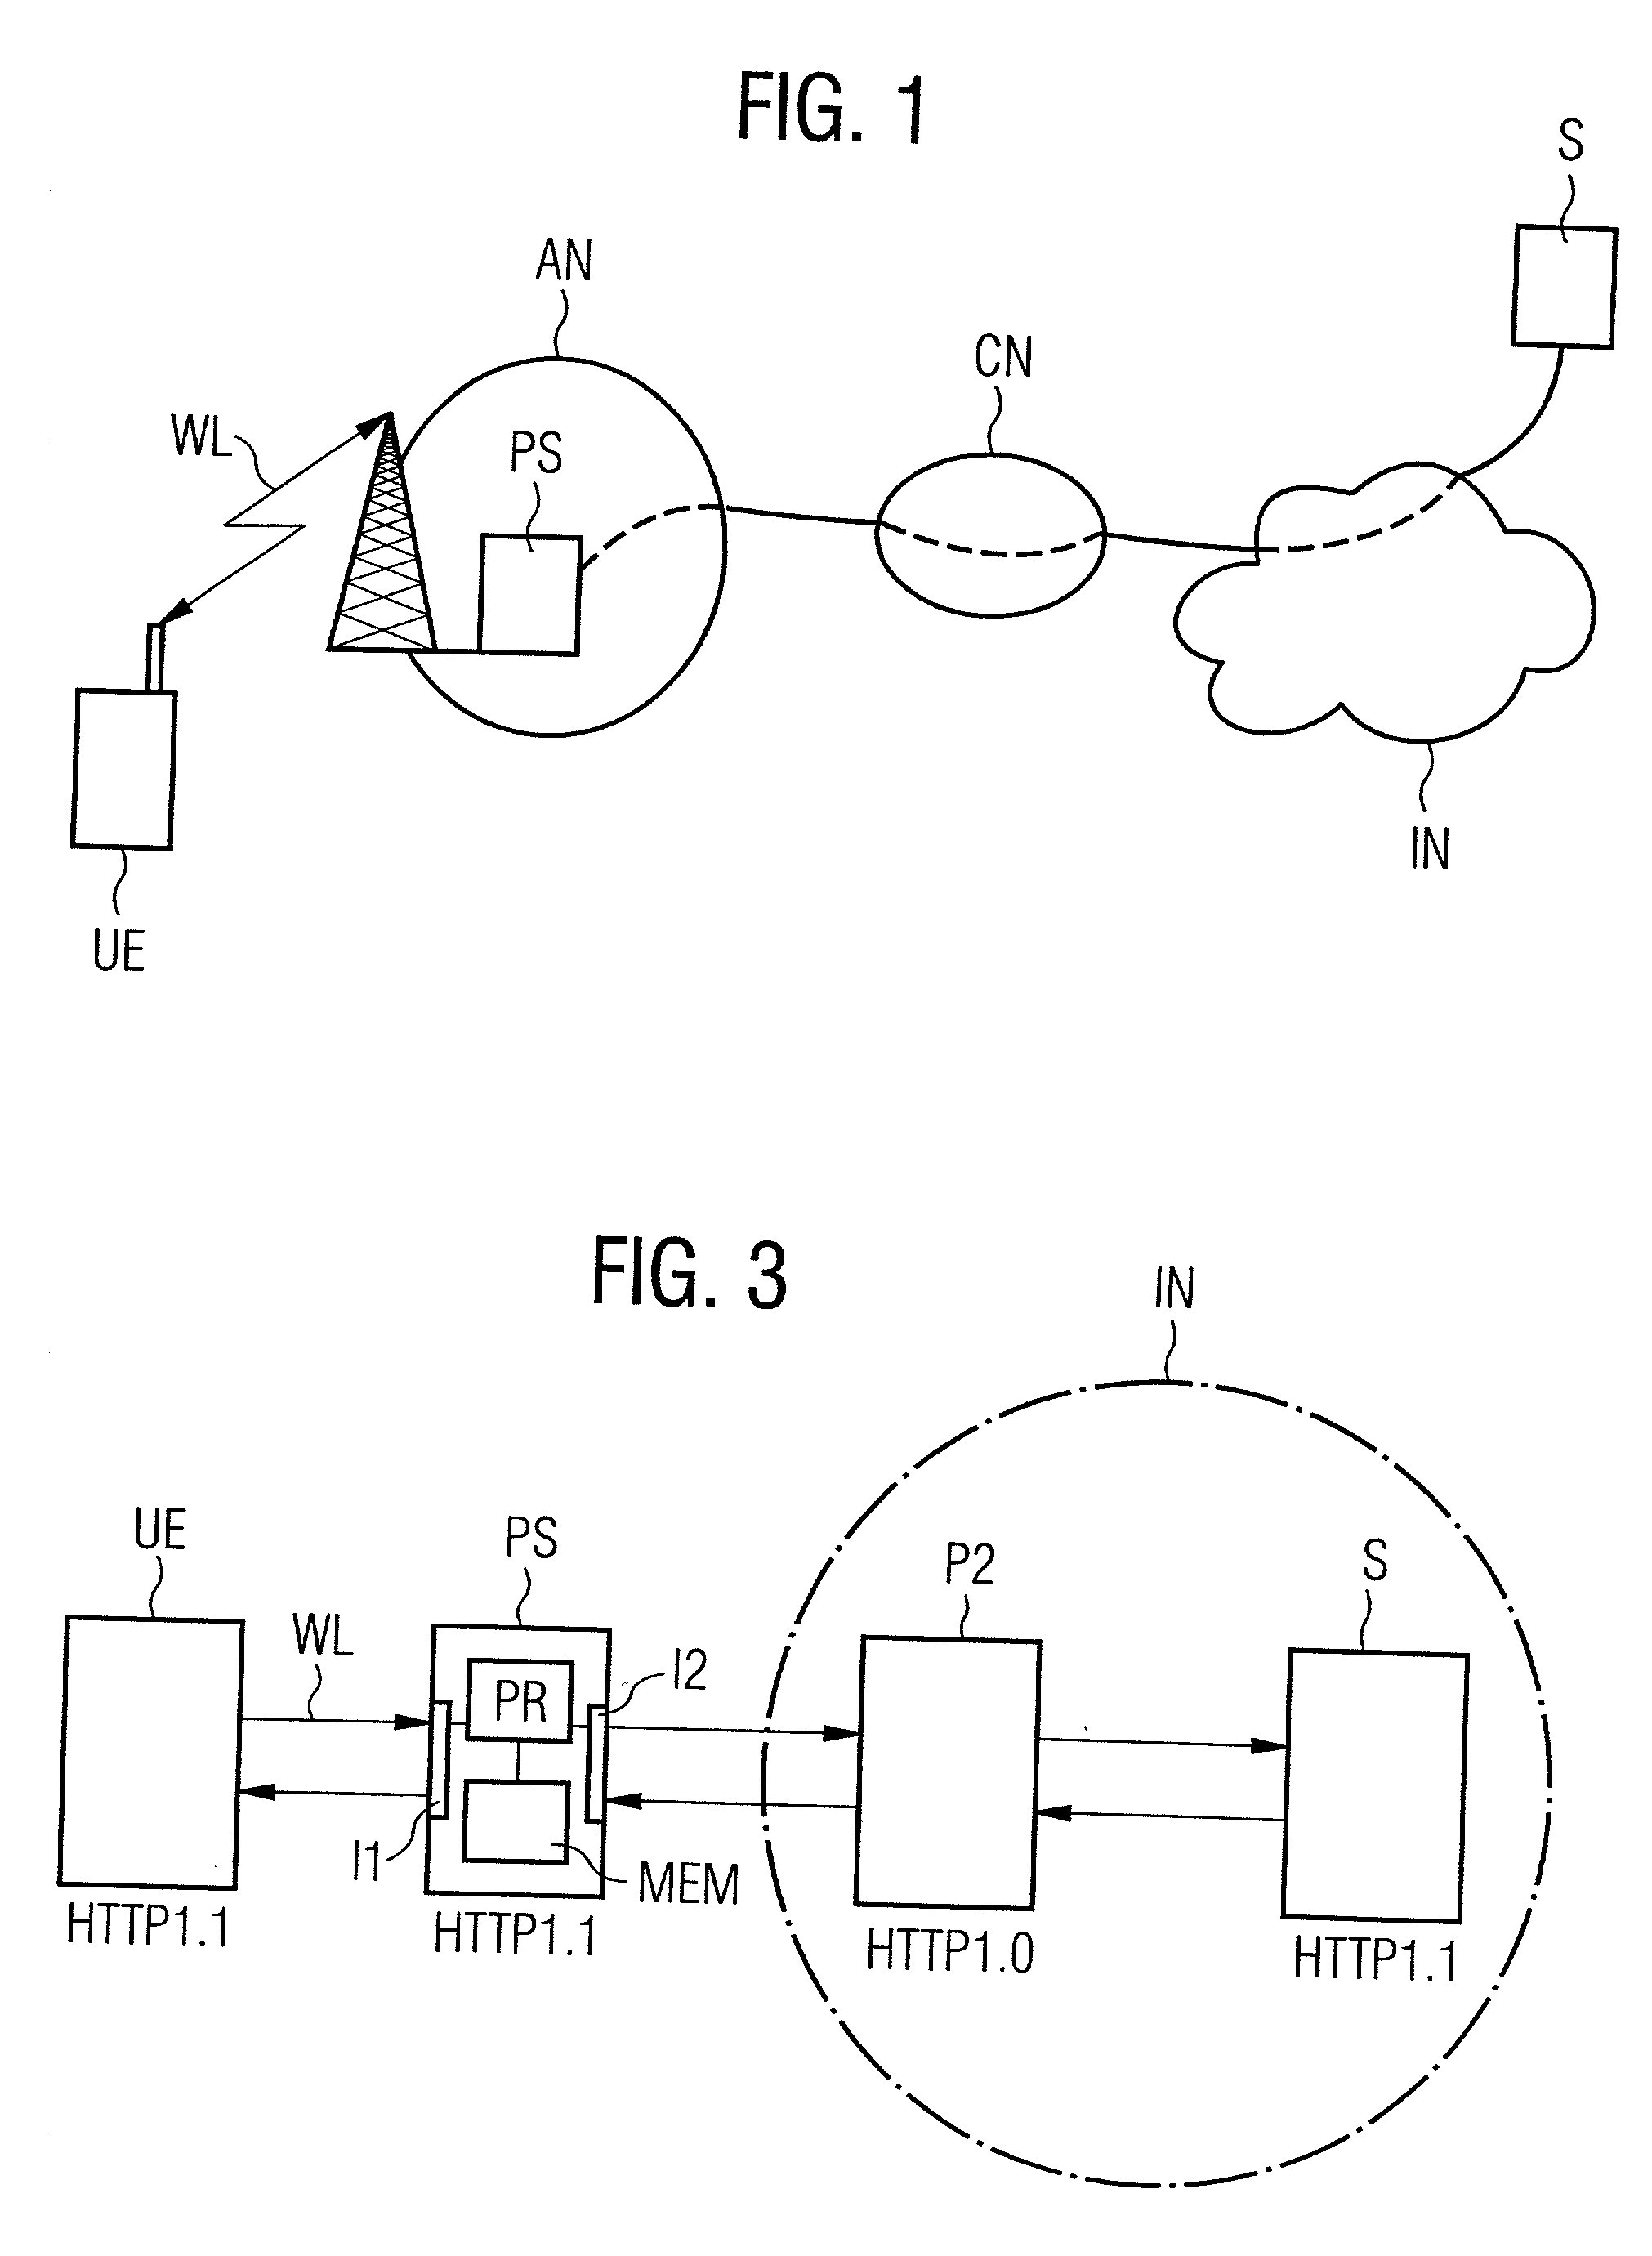 Method for an improved interworking of a user application and a server